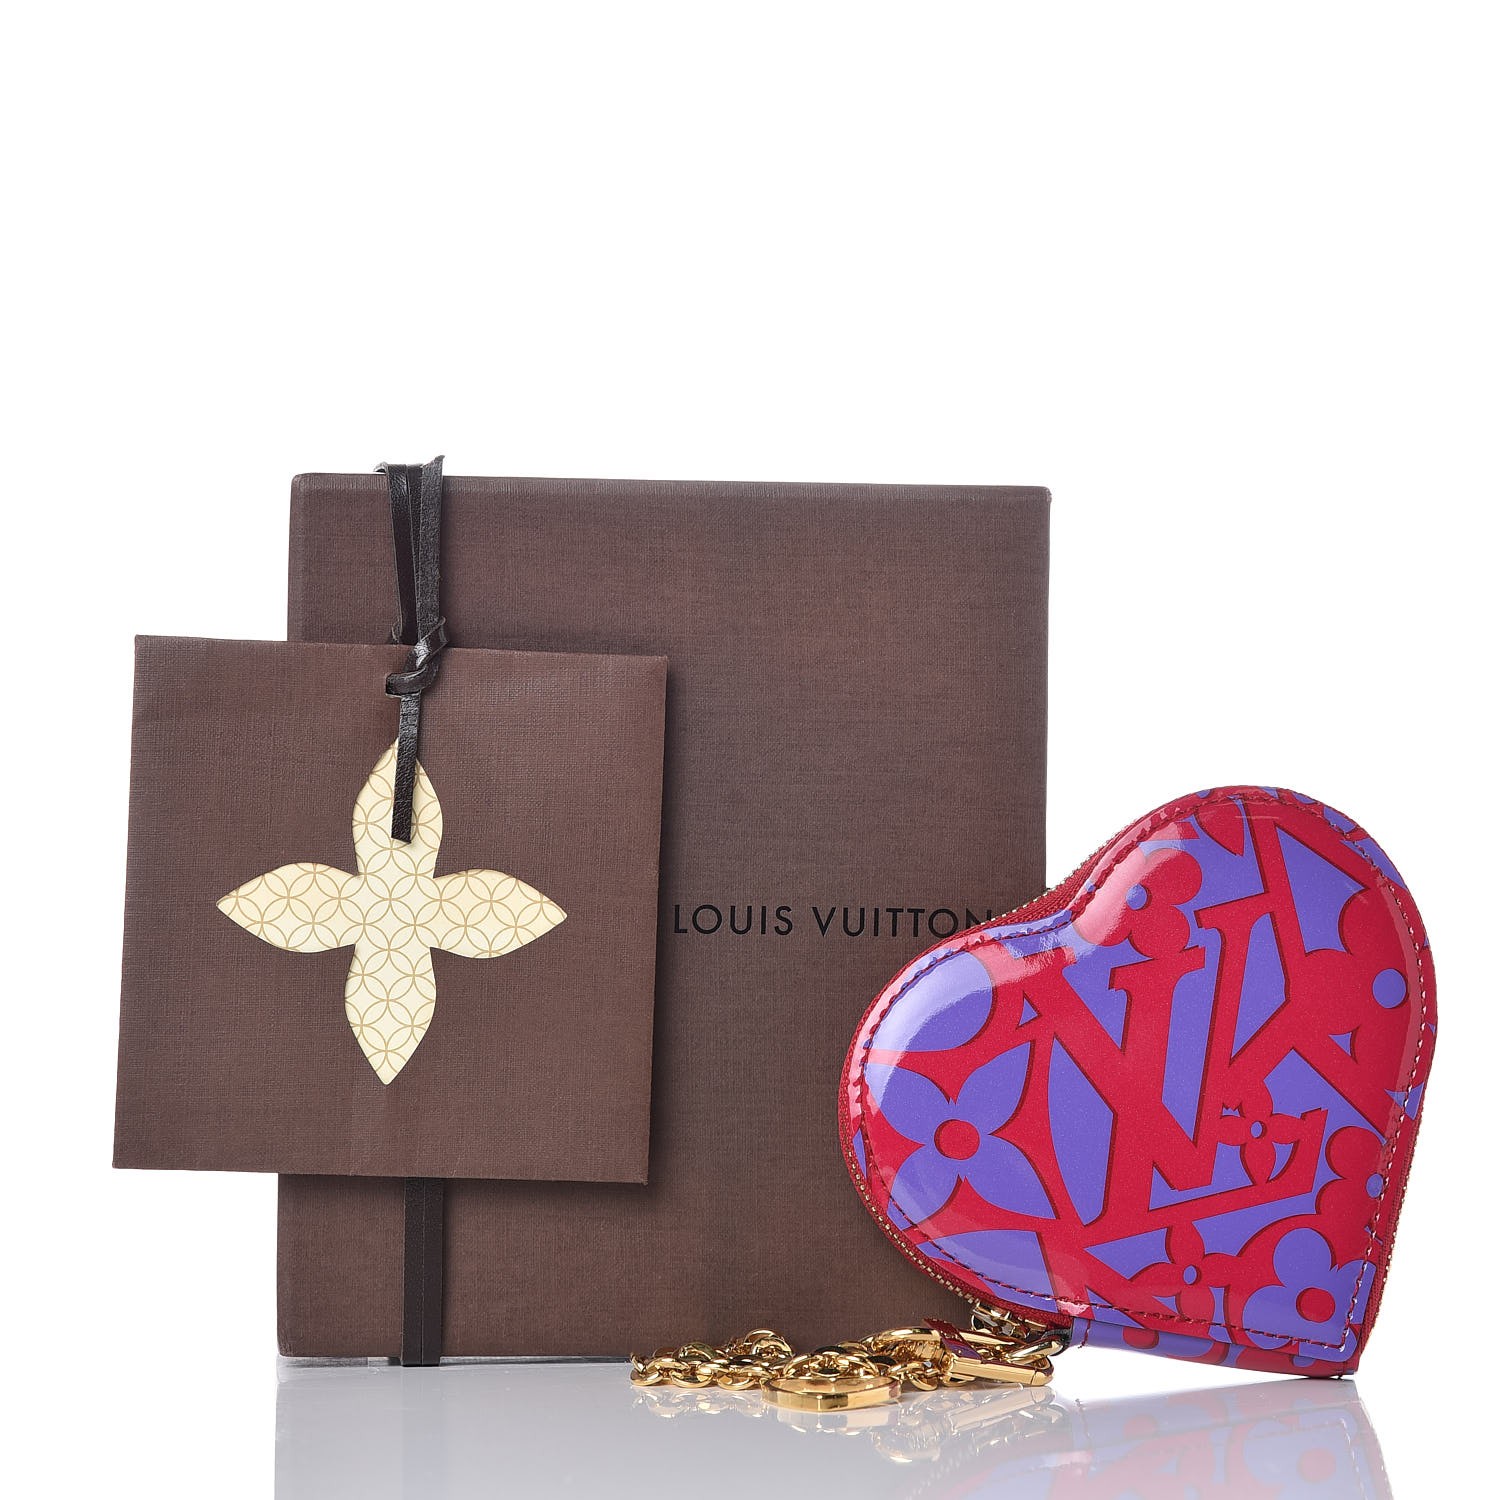 The Heart Of Louis Vuitton  Natural Resource Department